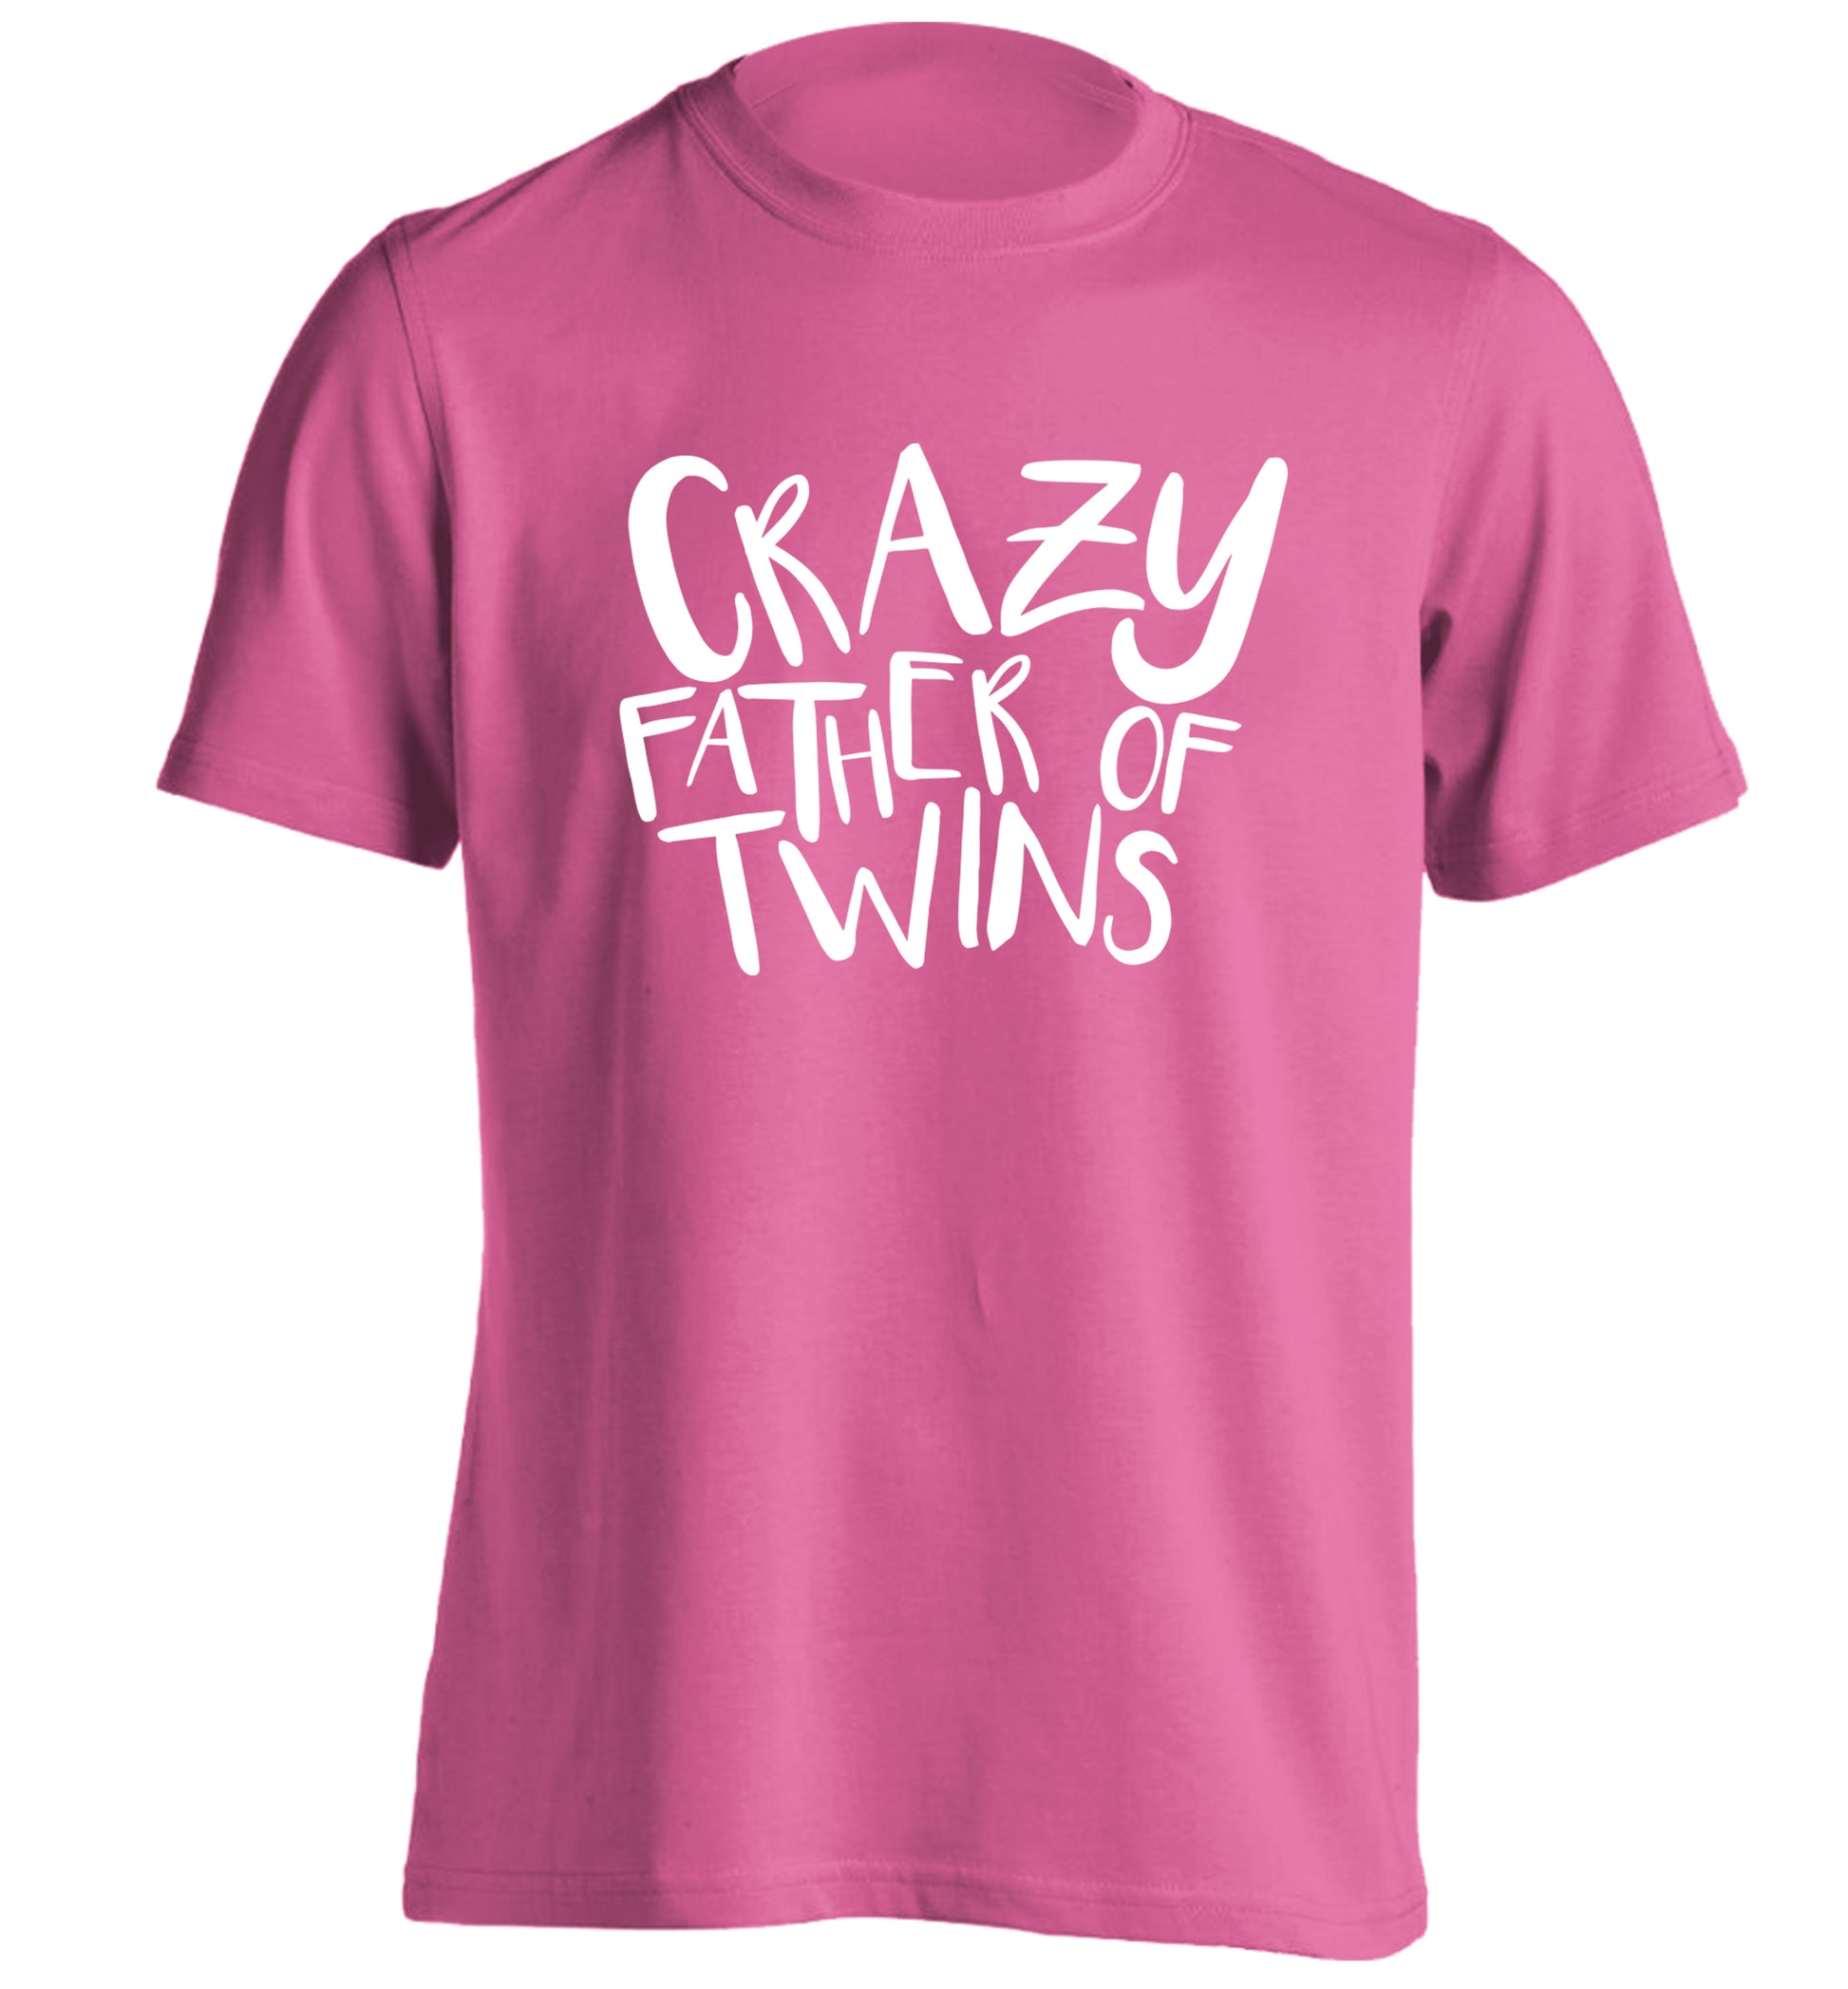 Crazy father of twins adults unisex pink Tshirt 2XL